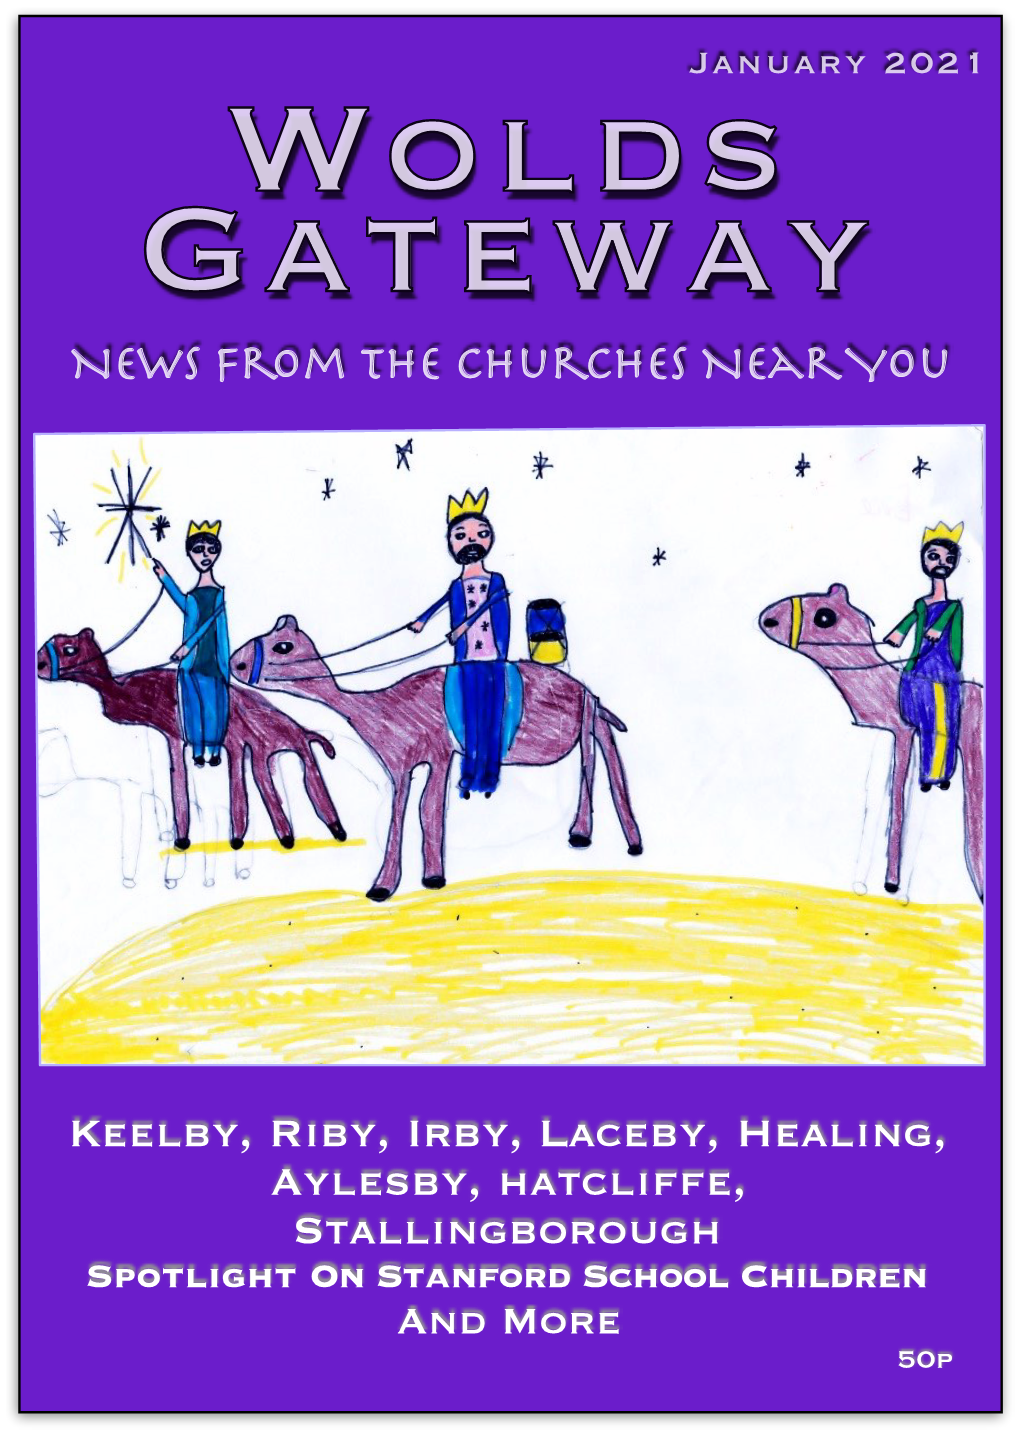 Wolds Gateway News from the Churches Near You